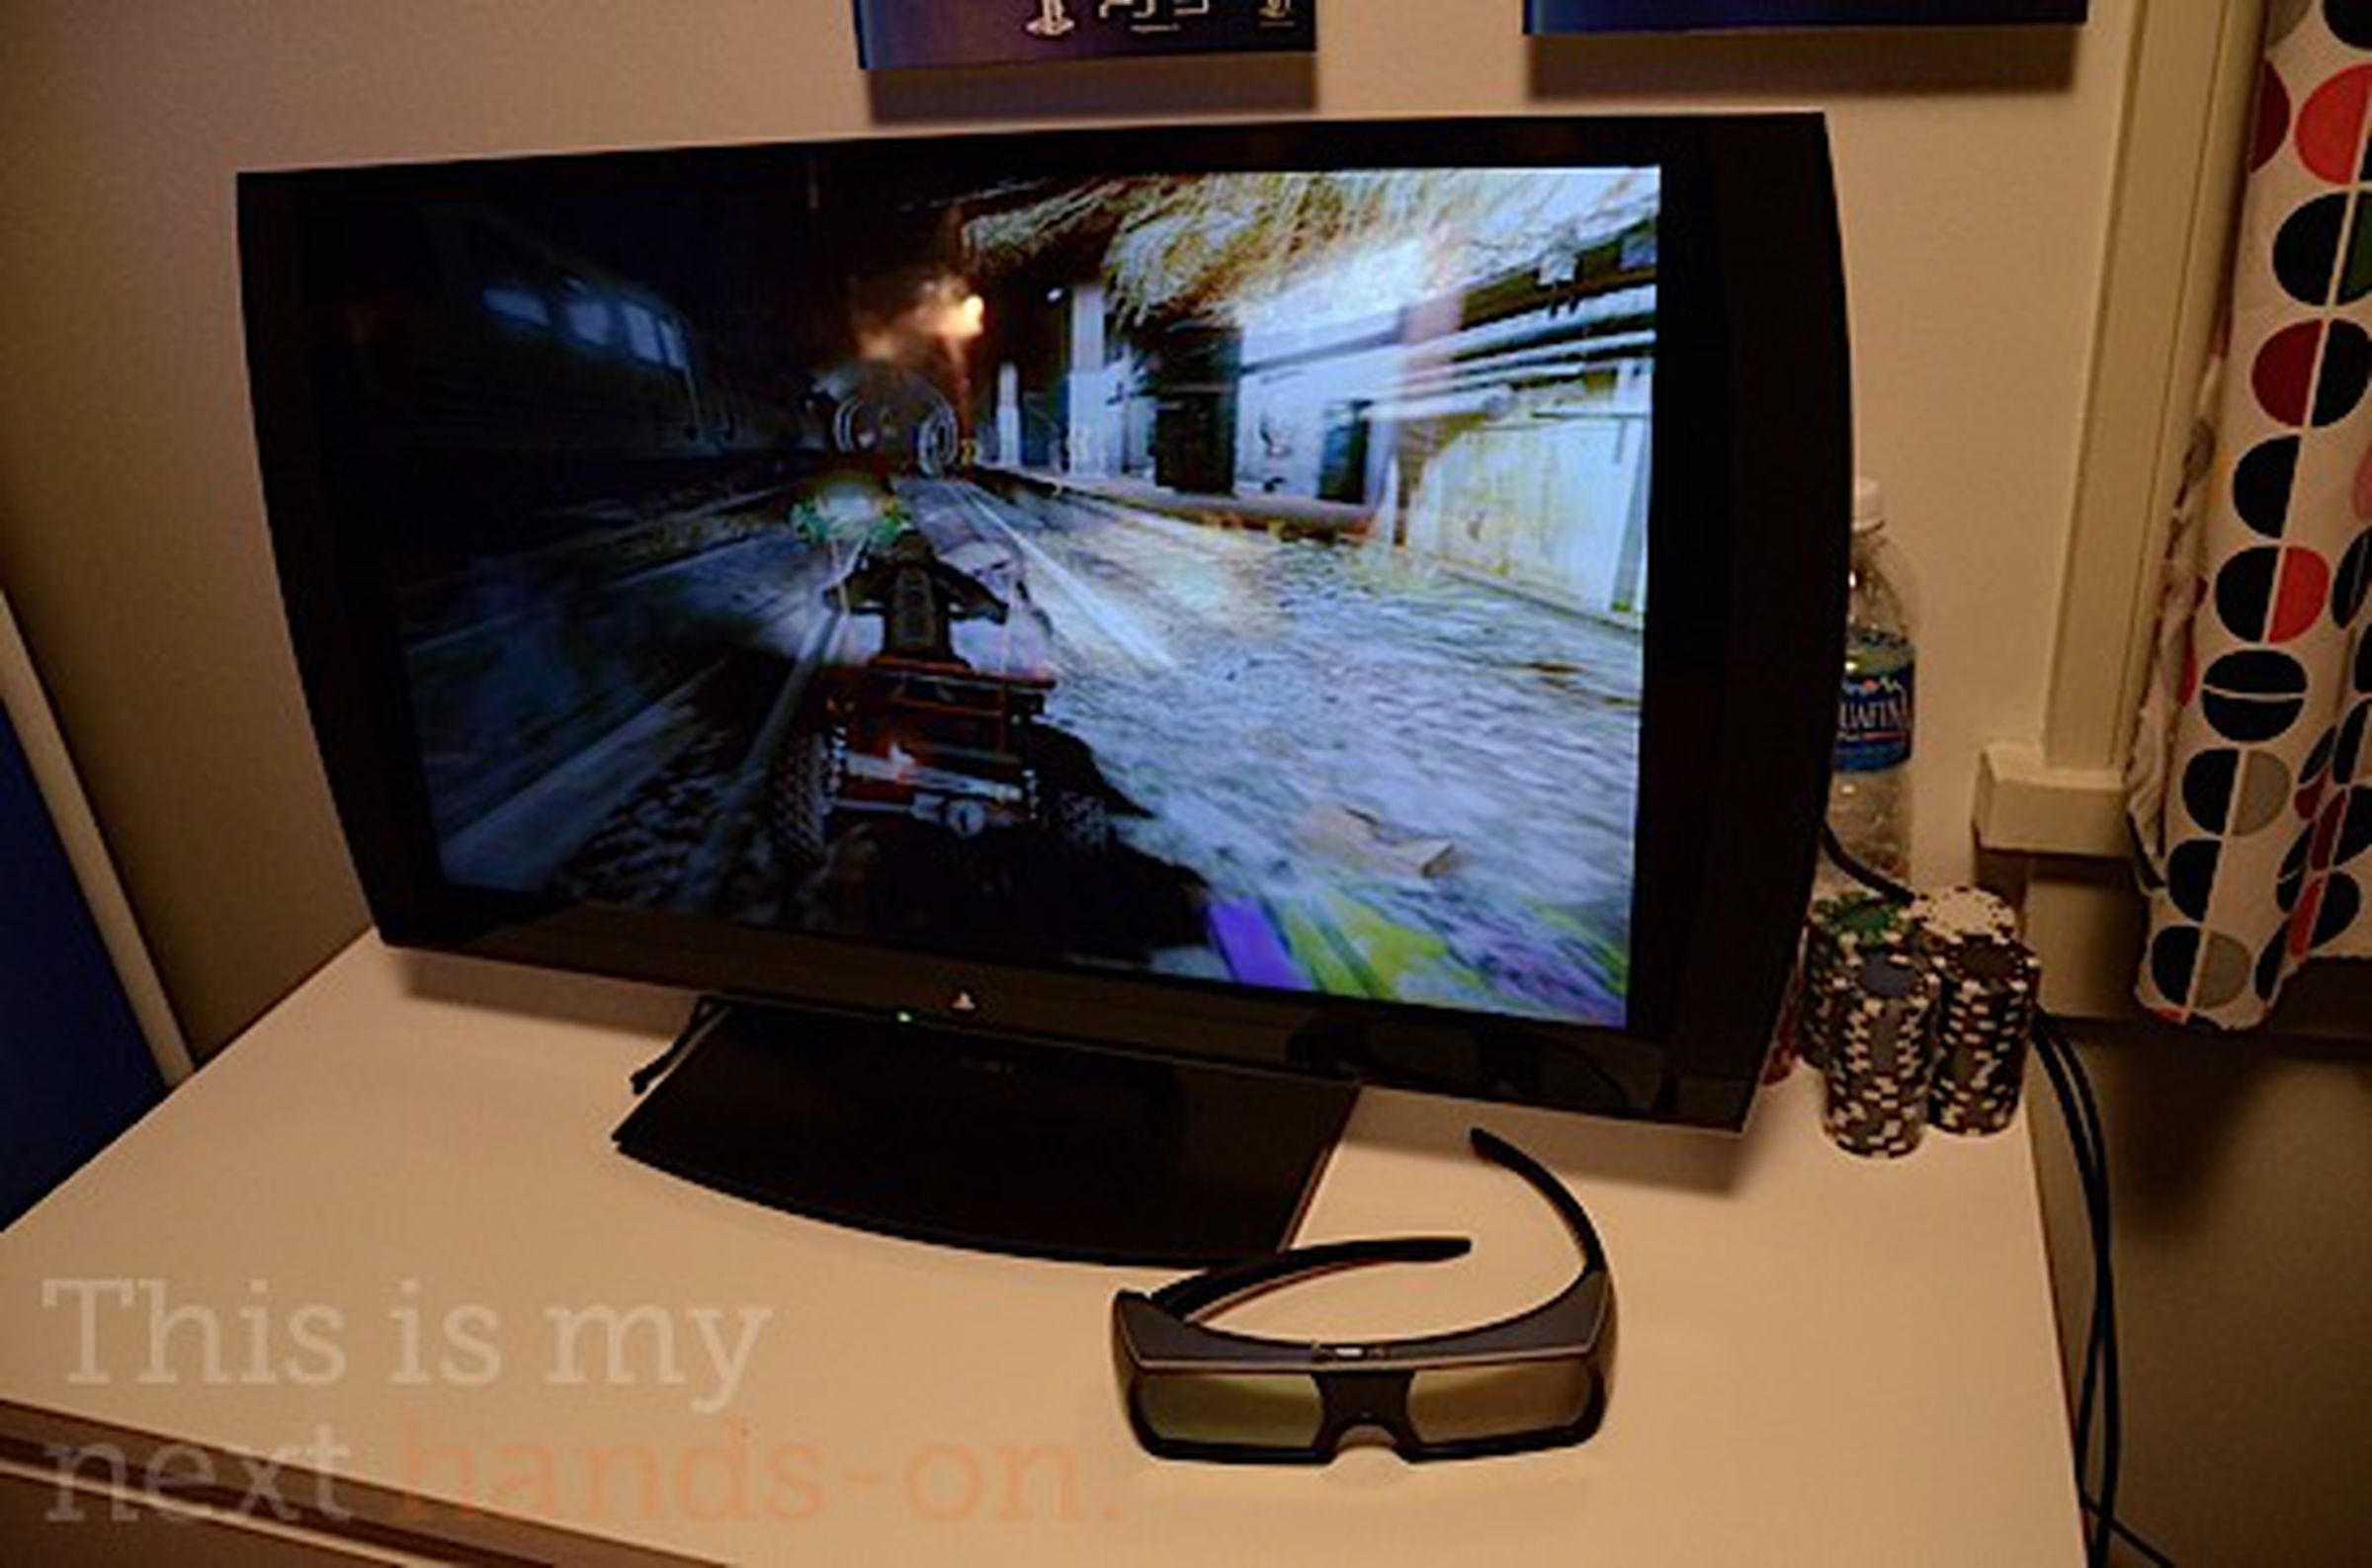 PlayStation 3D display hands-on: two players, one screen